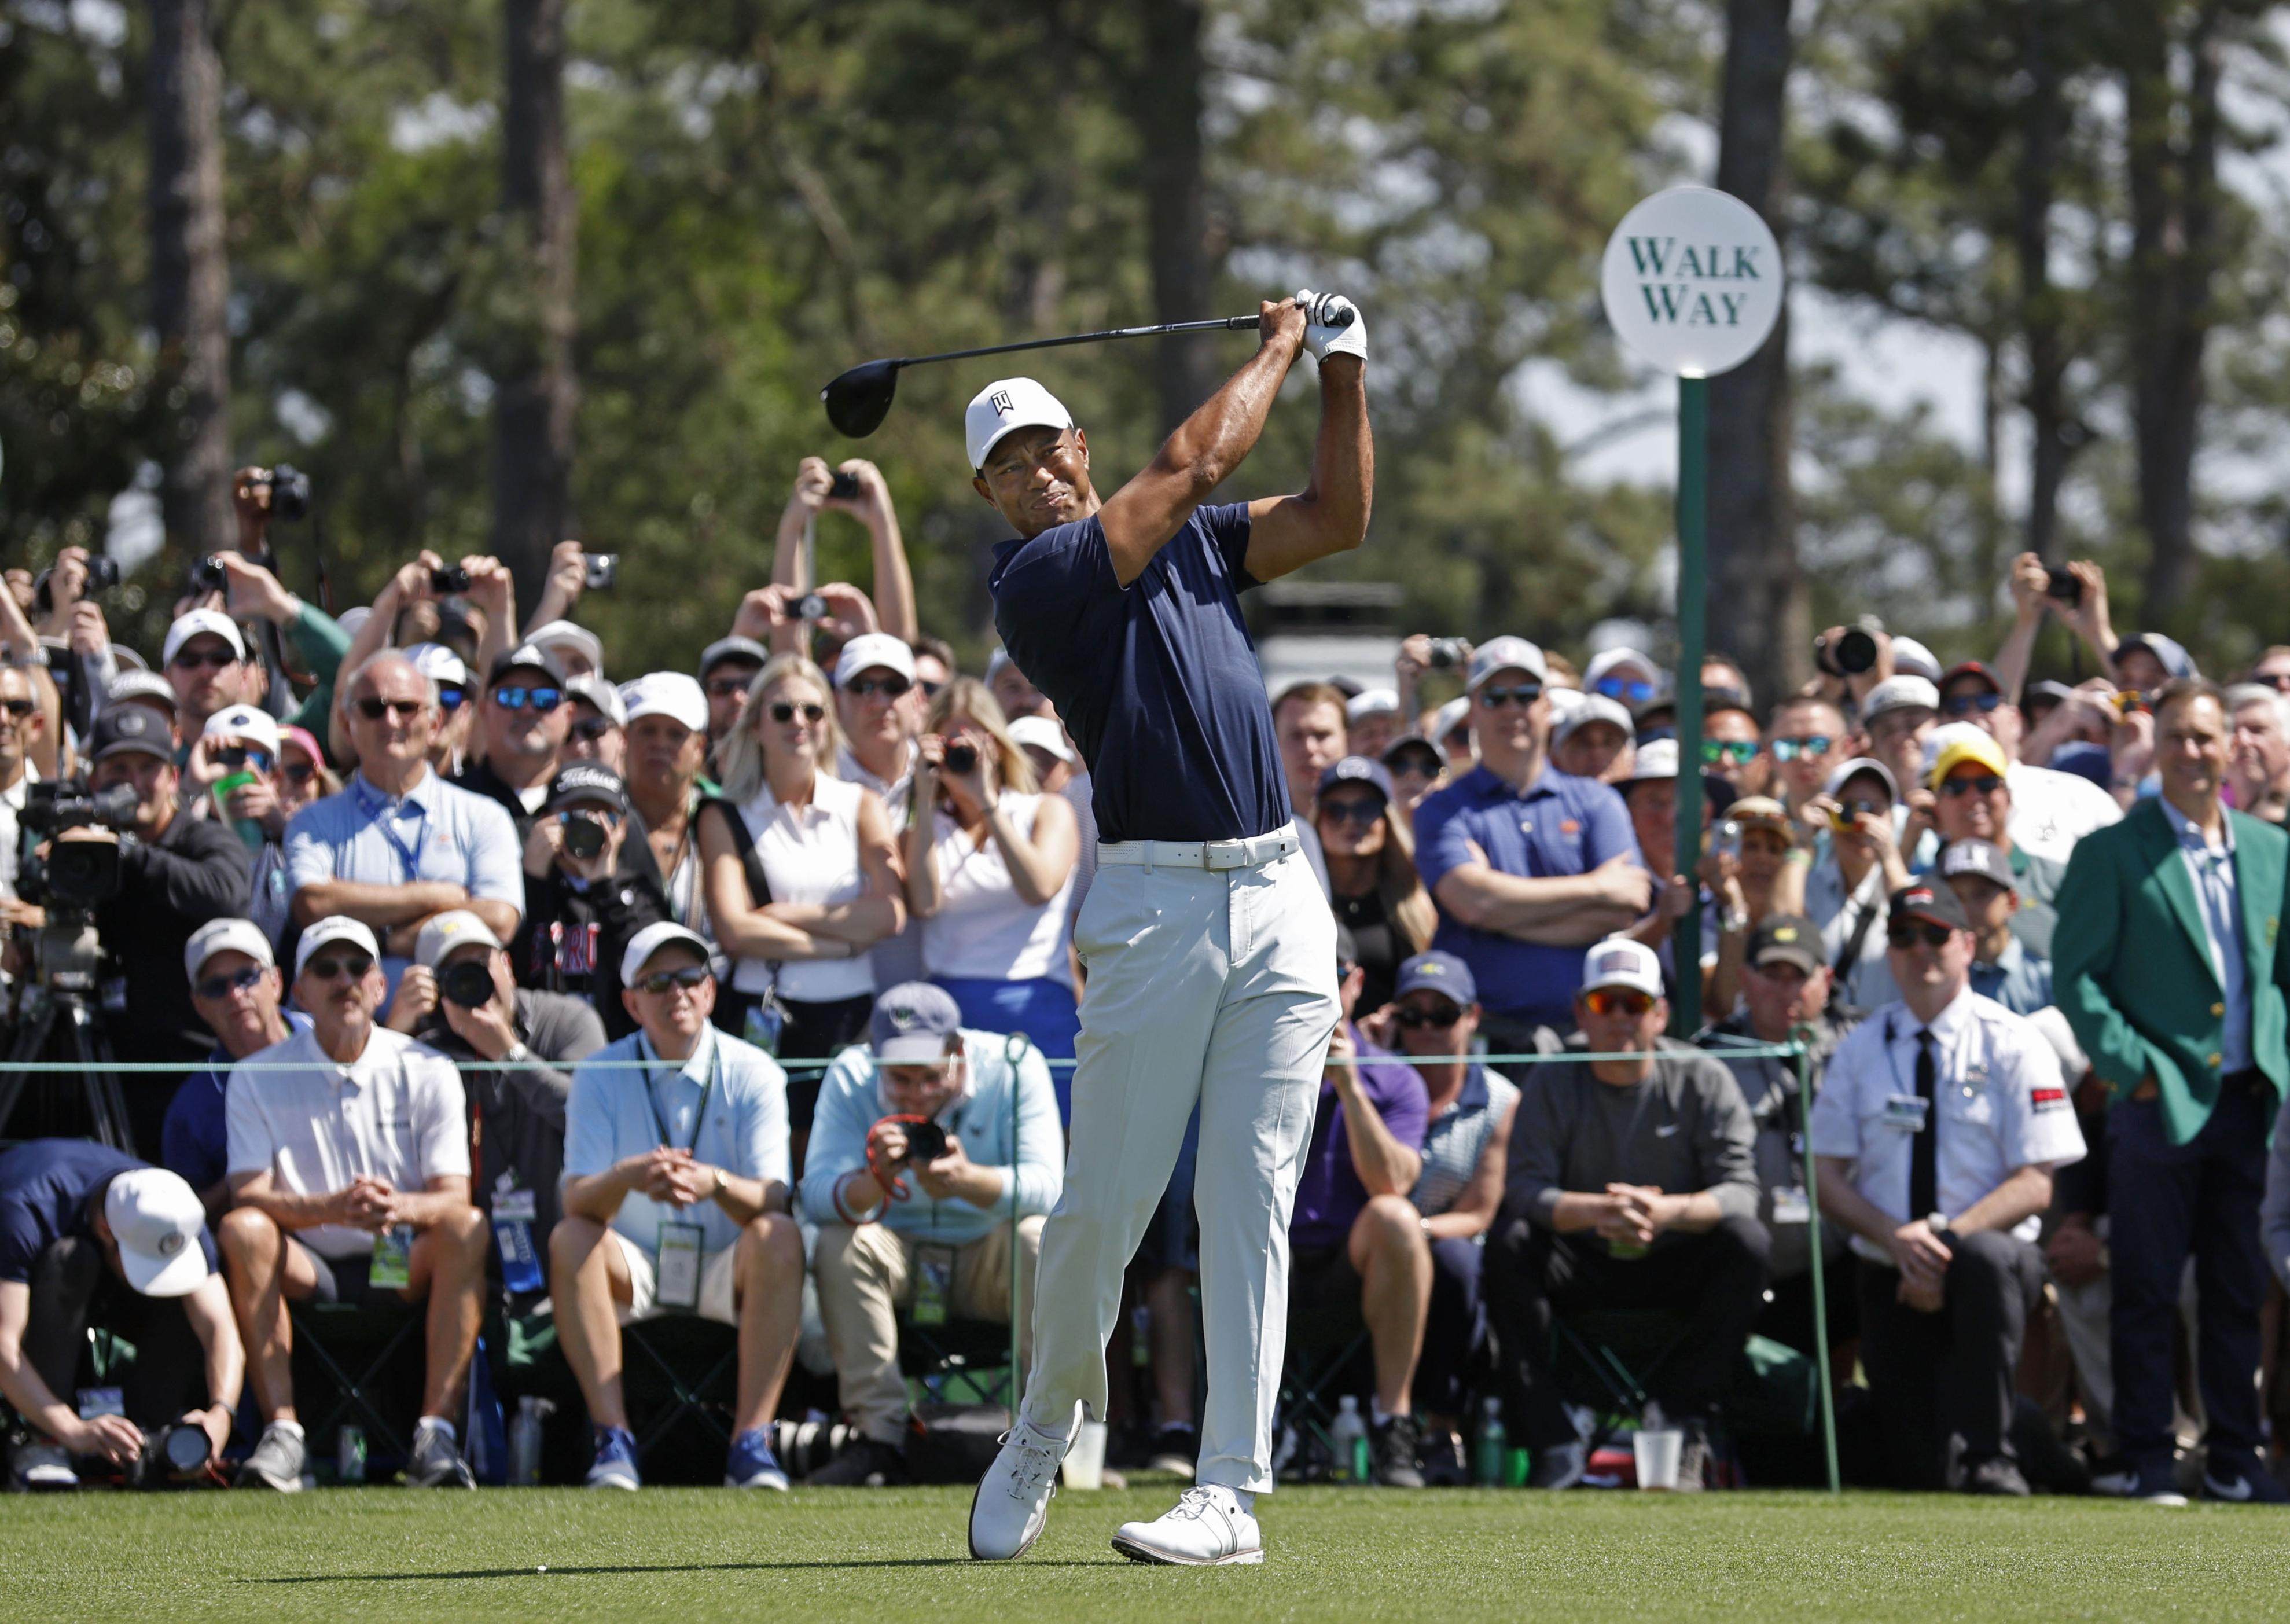 Tiger Woods of the United States plays a practice round ahead of the Masters Tournament at Augusta National Golf Club in Augusta, Georgia. Photo: Kyodo